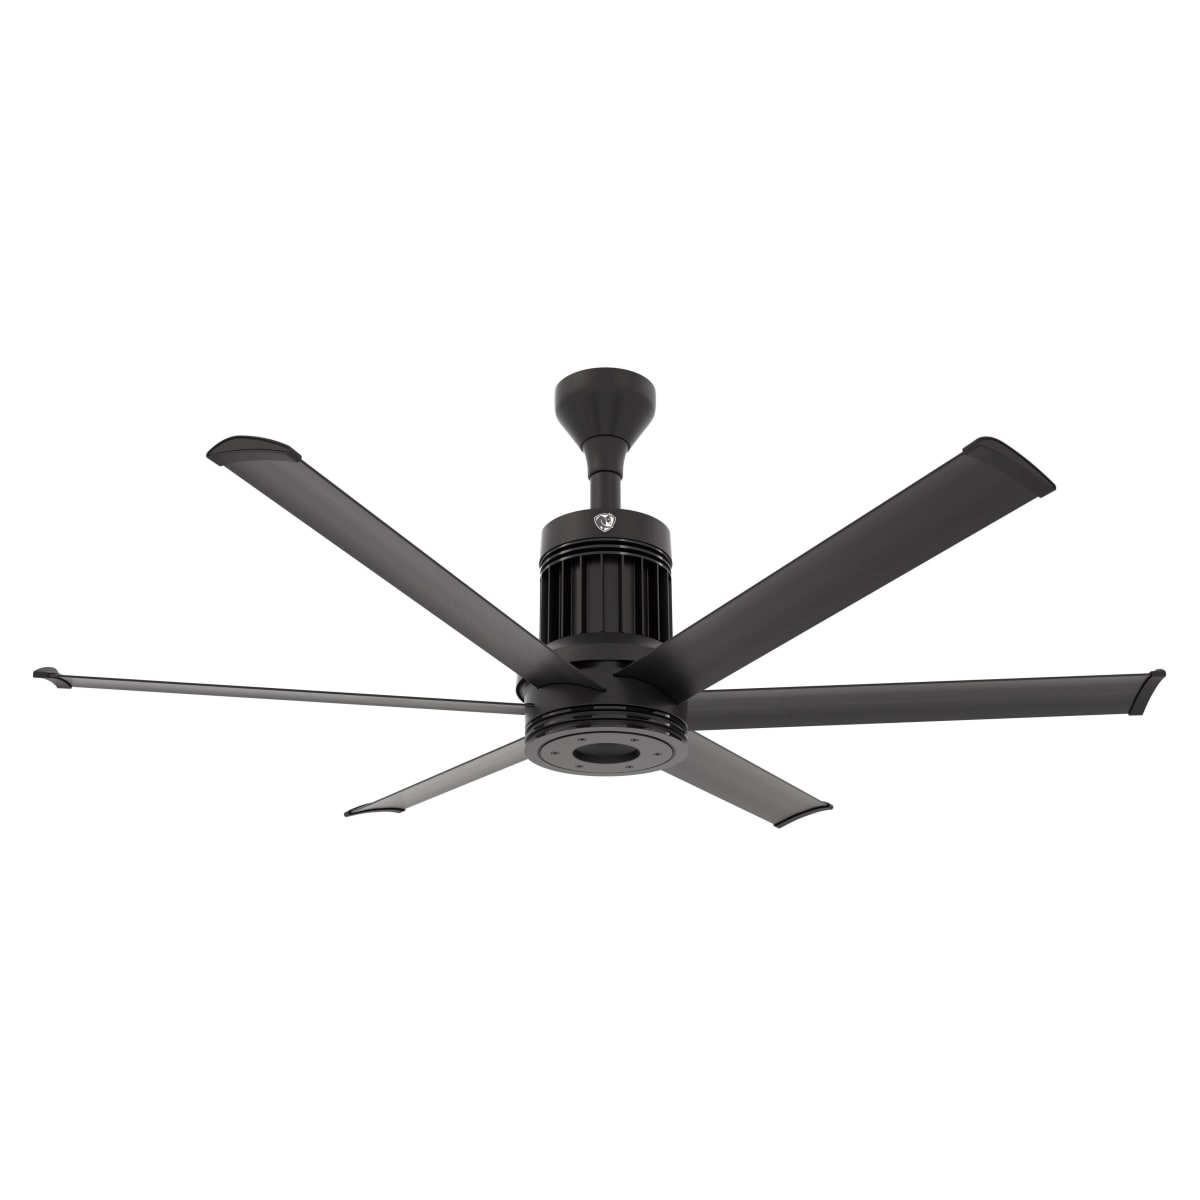 Large Industrial 60 in Indoor Ceiling Fan w/ Downrod Mount Wall Remote Control 